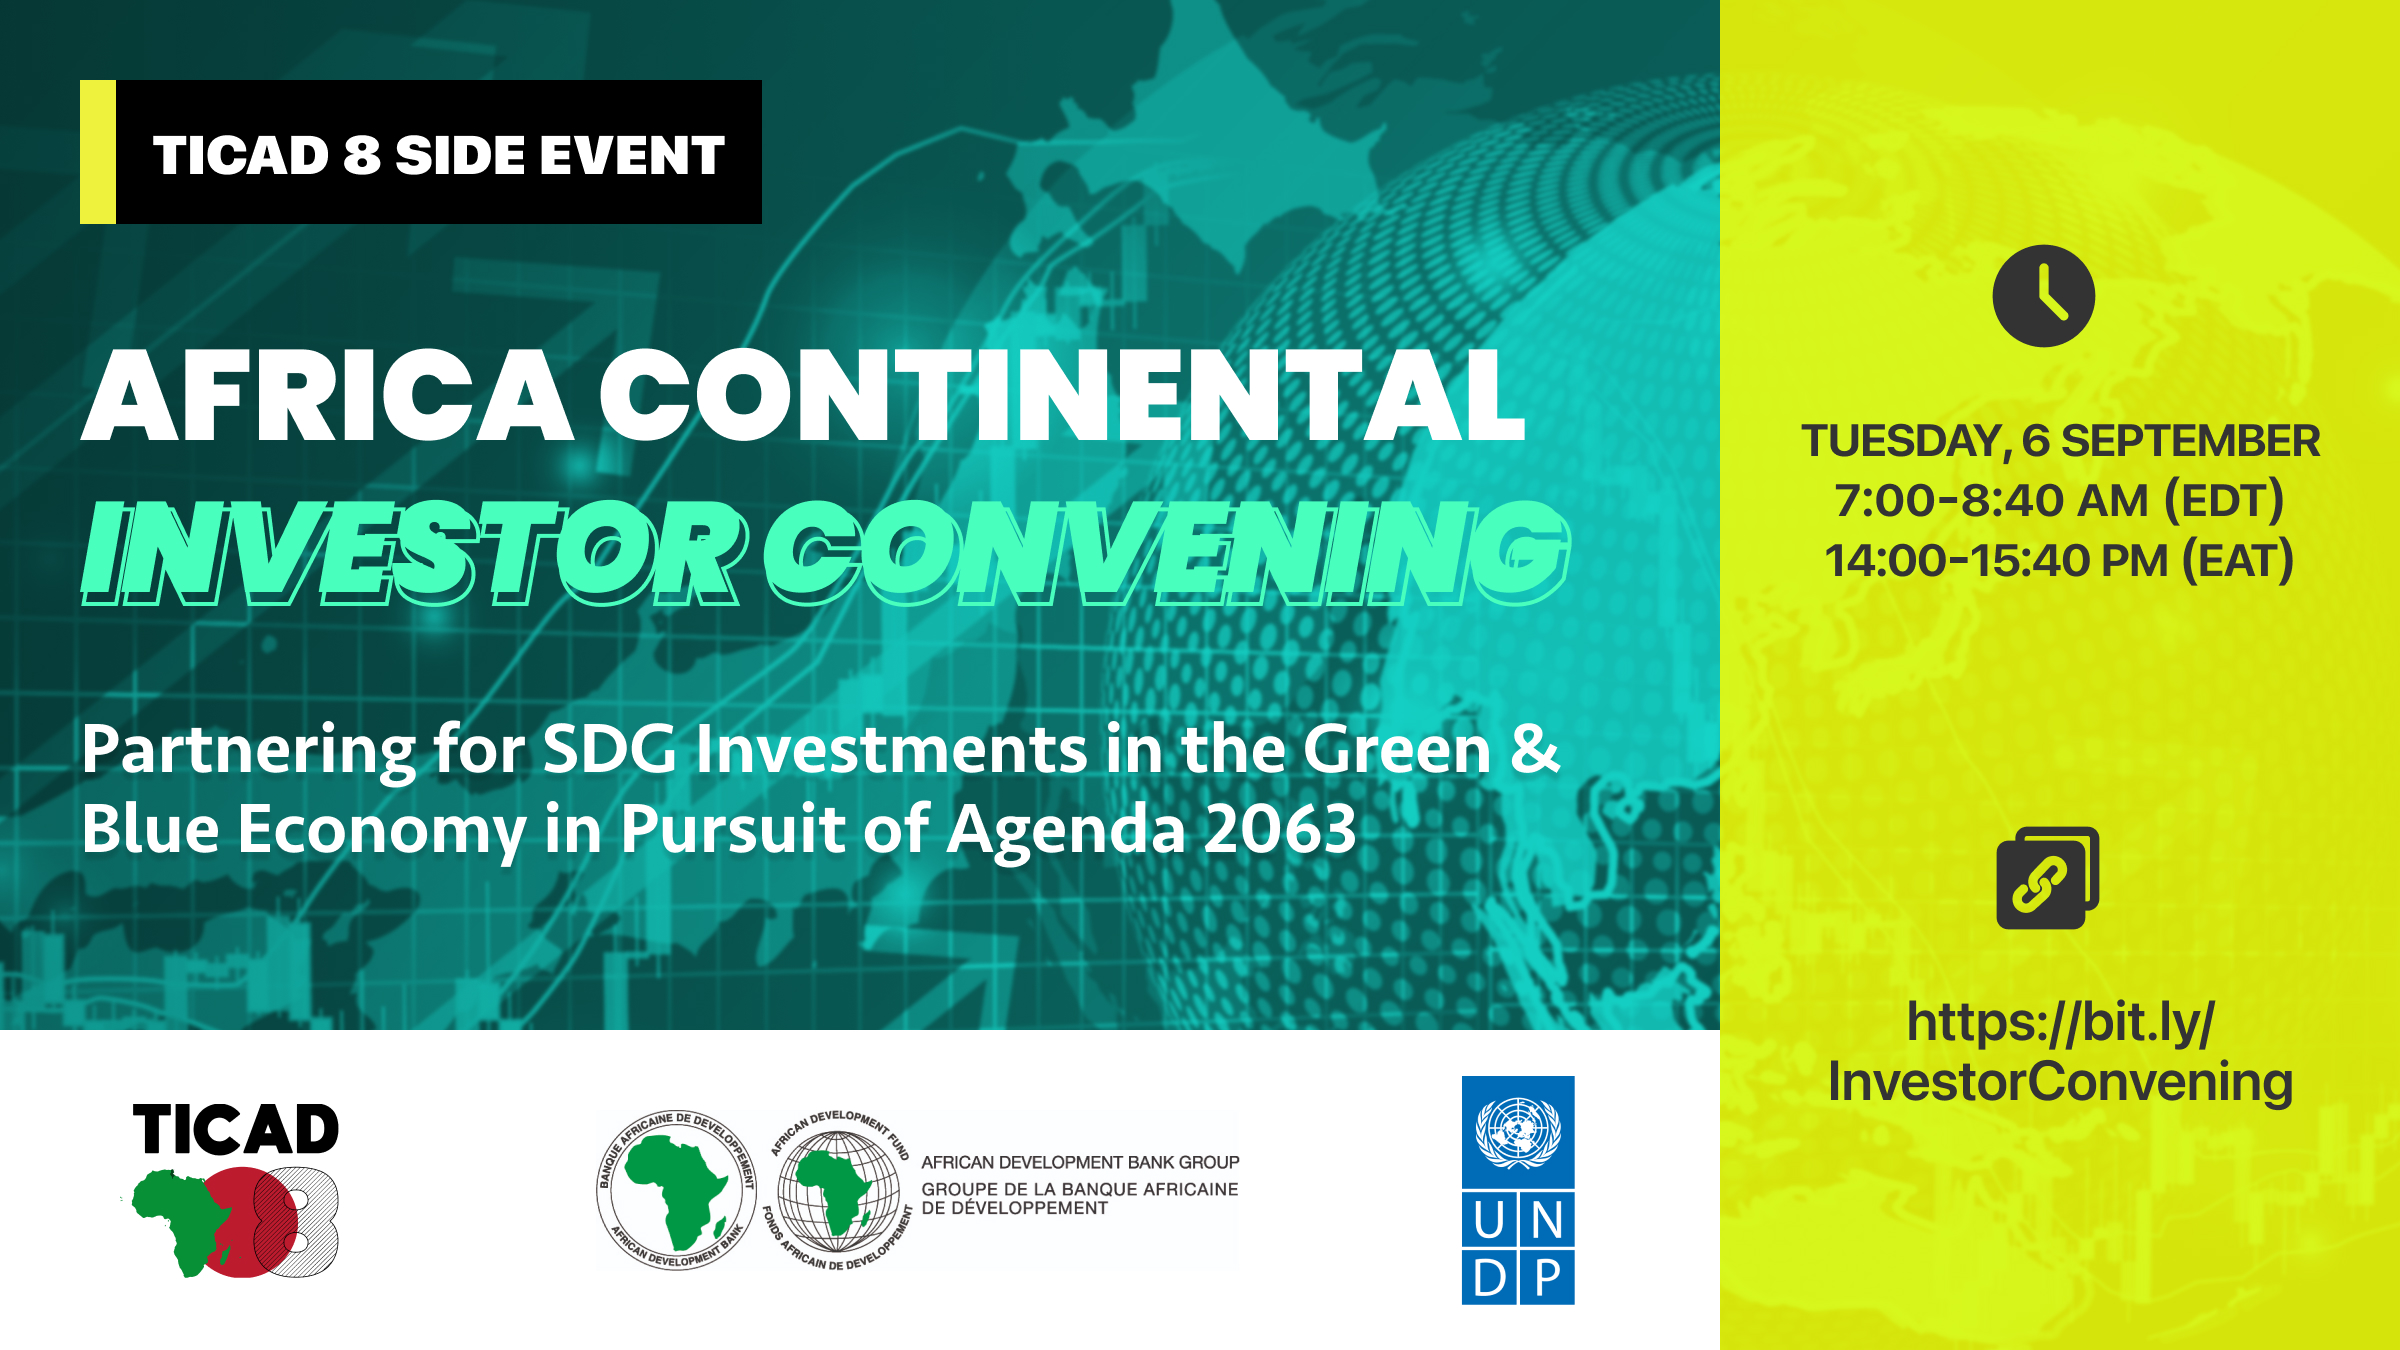 ticad8 side event on investor convening